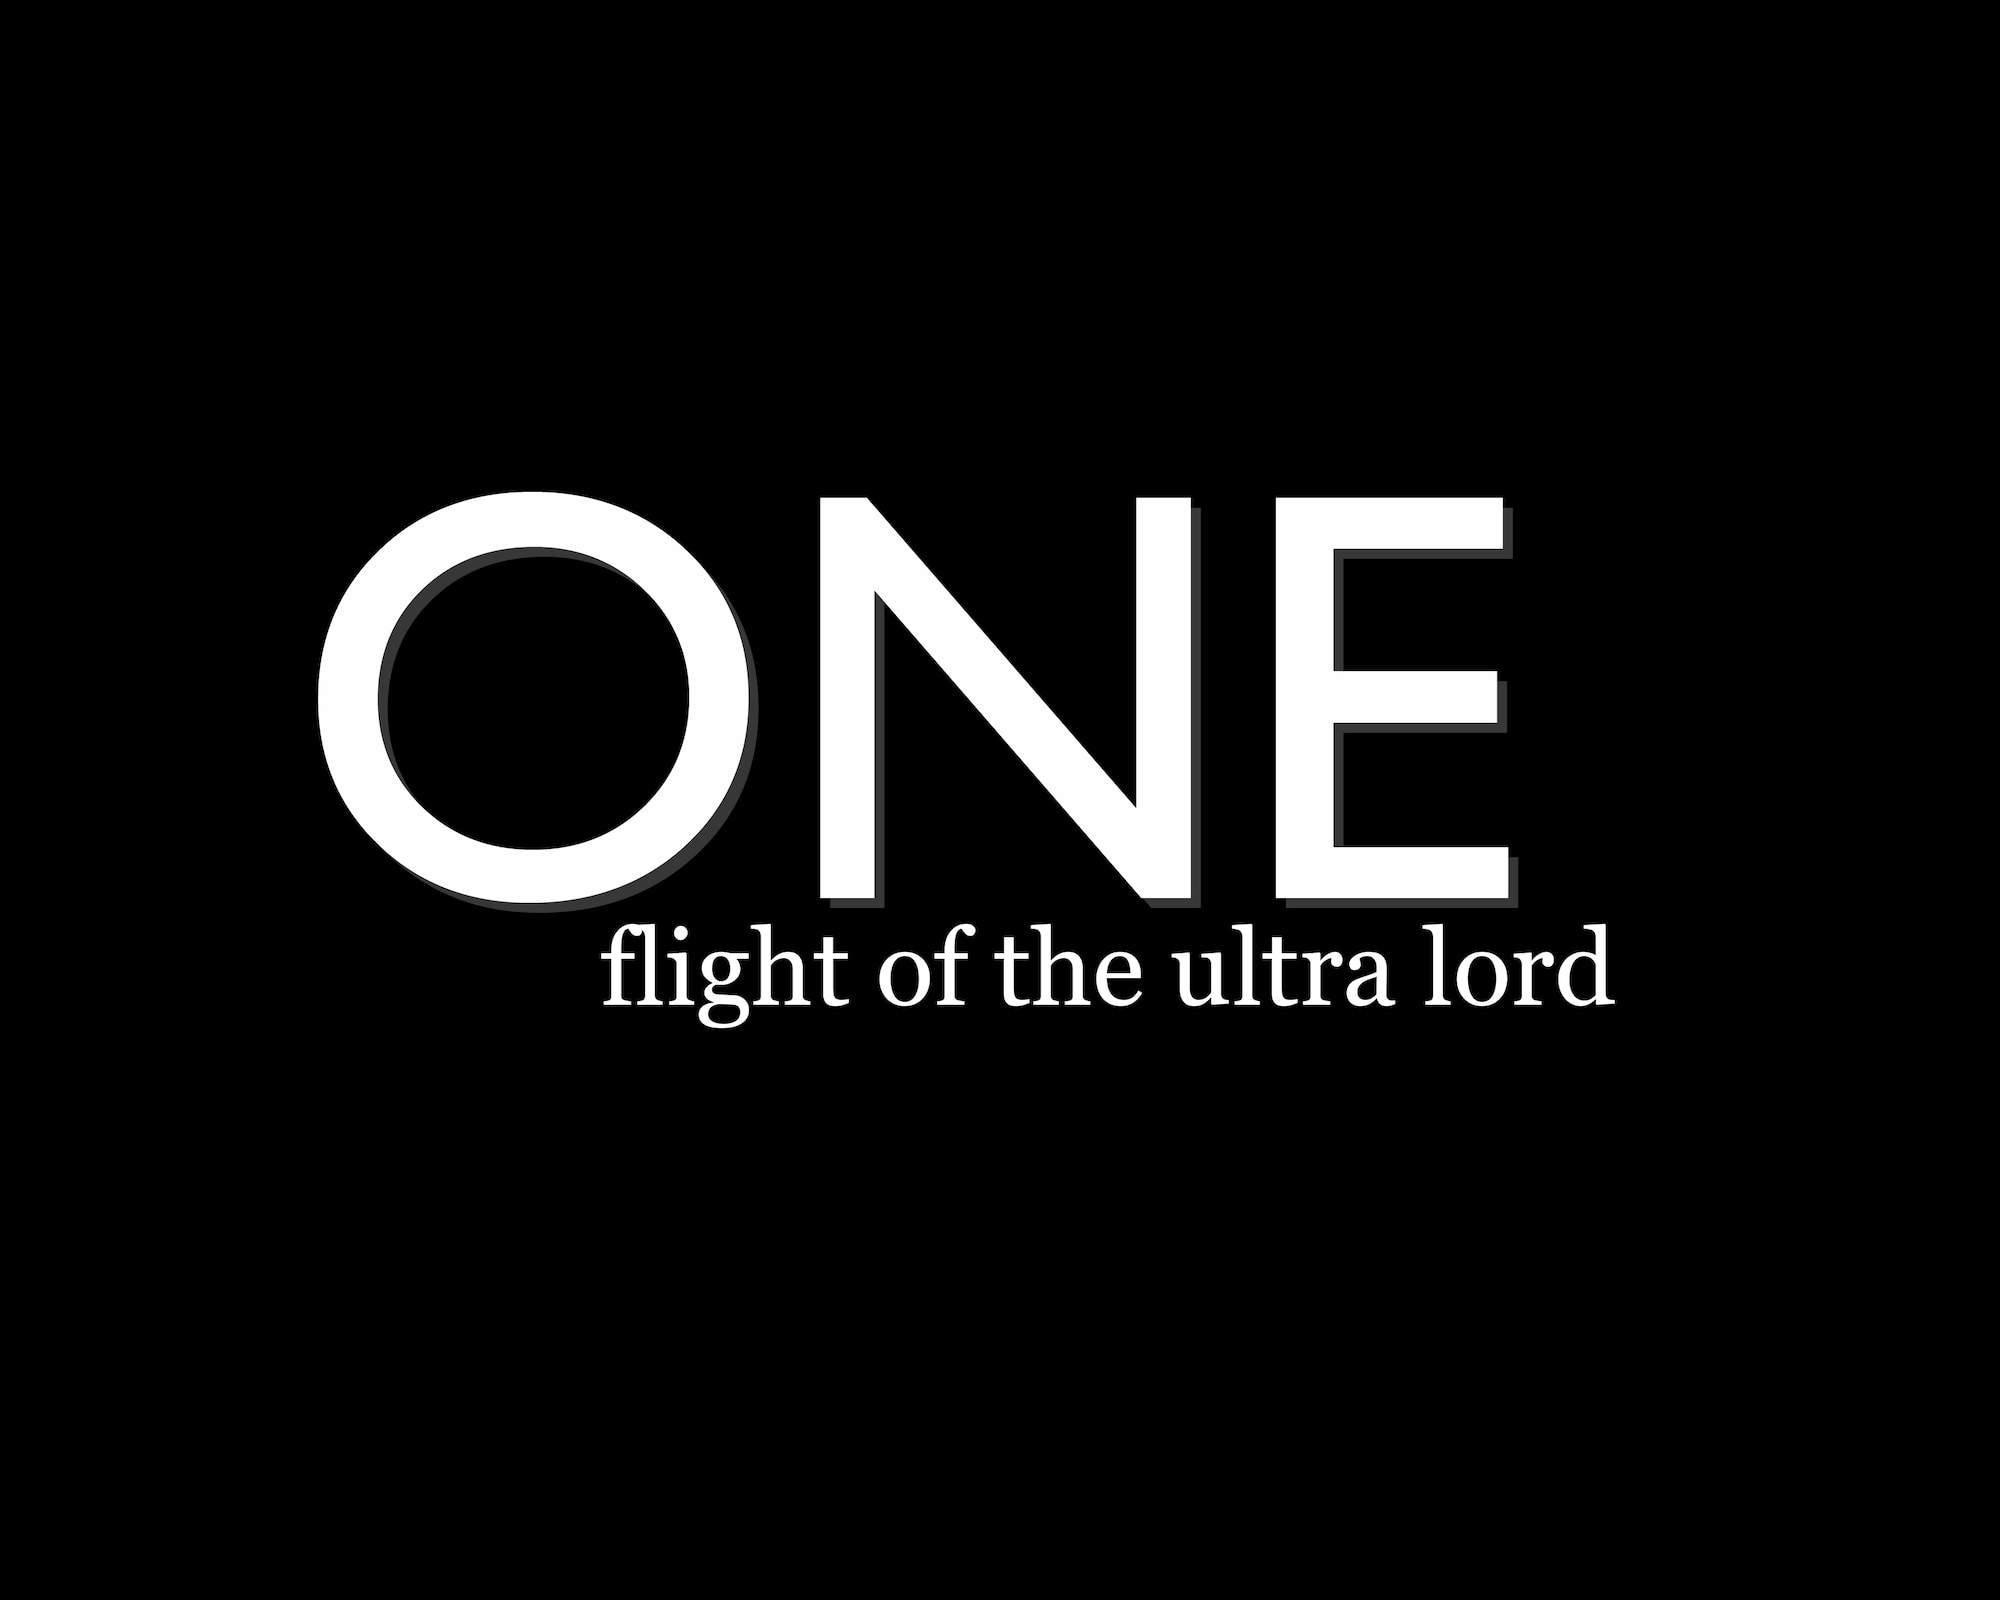 ONE: flight of the ultra lord (U.S. Air Force graphic by Staff Sgt. Jarad A. Denton/Released)